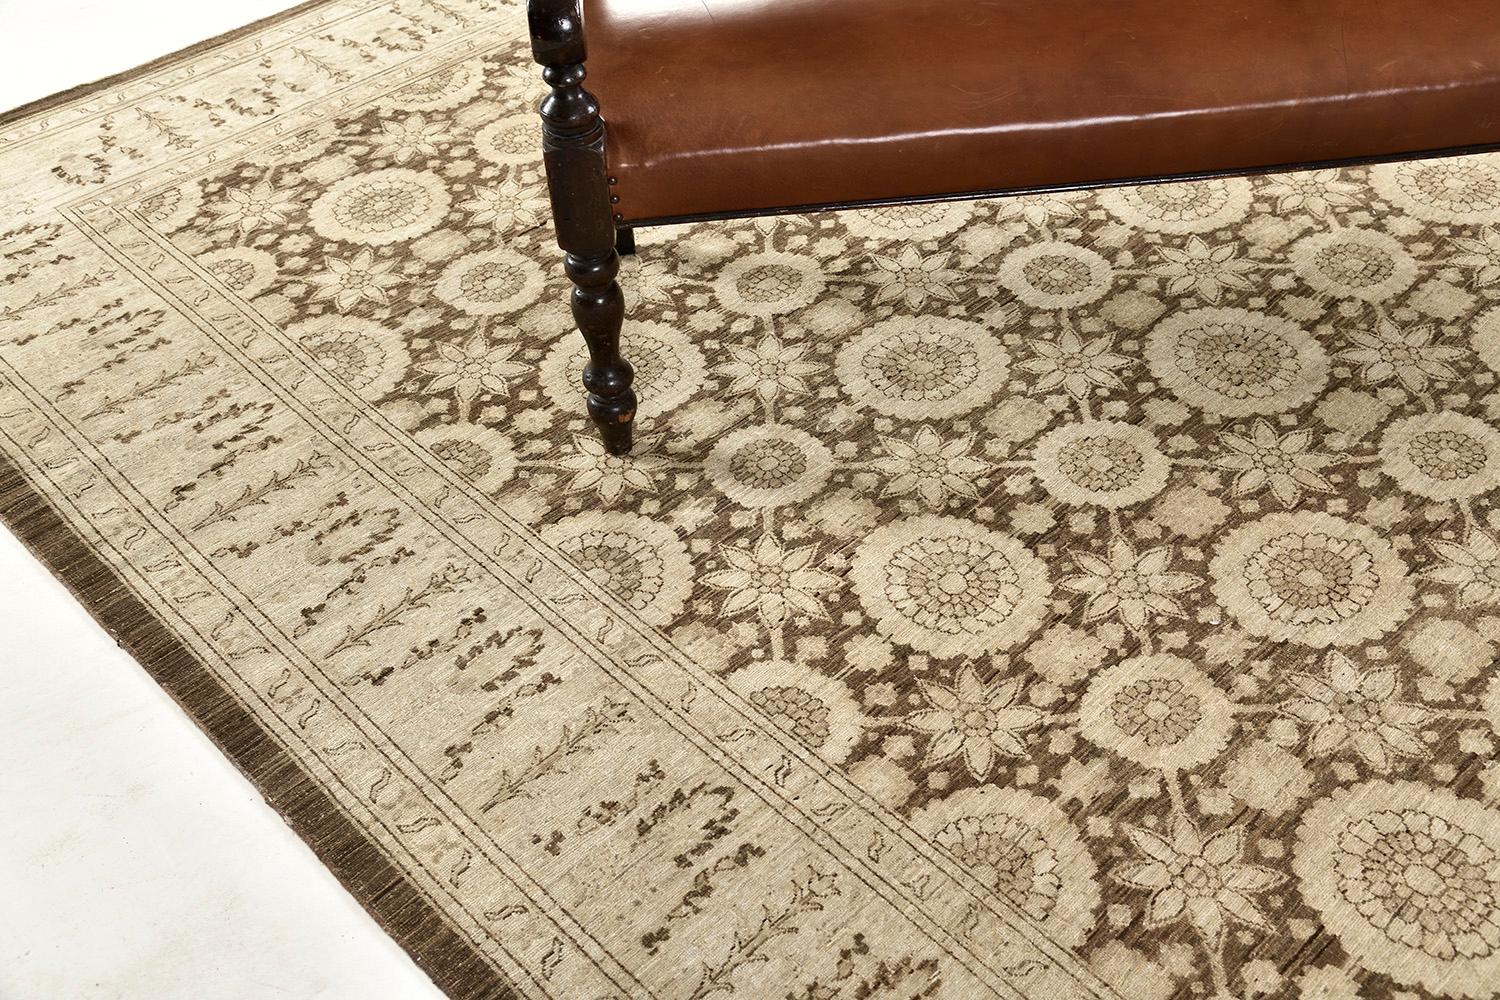 An elegant revival of Hadji Jalili has a neutral ground with cream and tan motifs that are accentuated with walnut-colored outlines. An all-over pattern that has finely rendered motifs of branching vines, palmettes, carnation, and leaf and floral